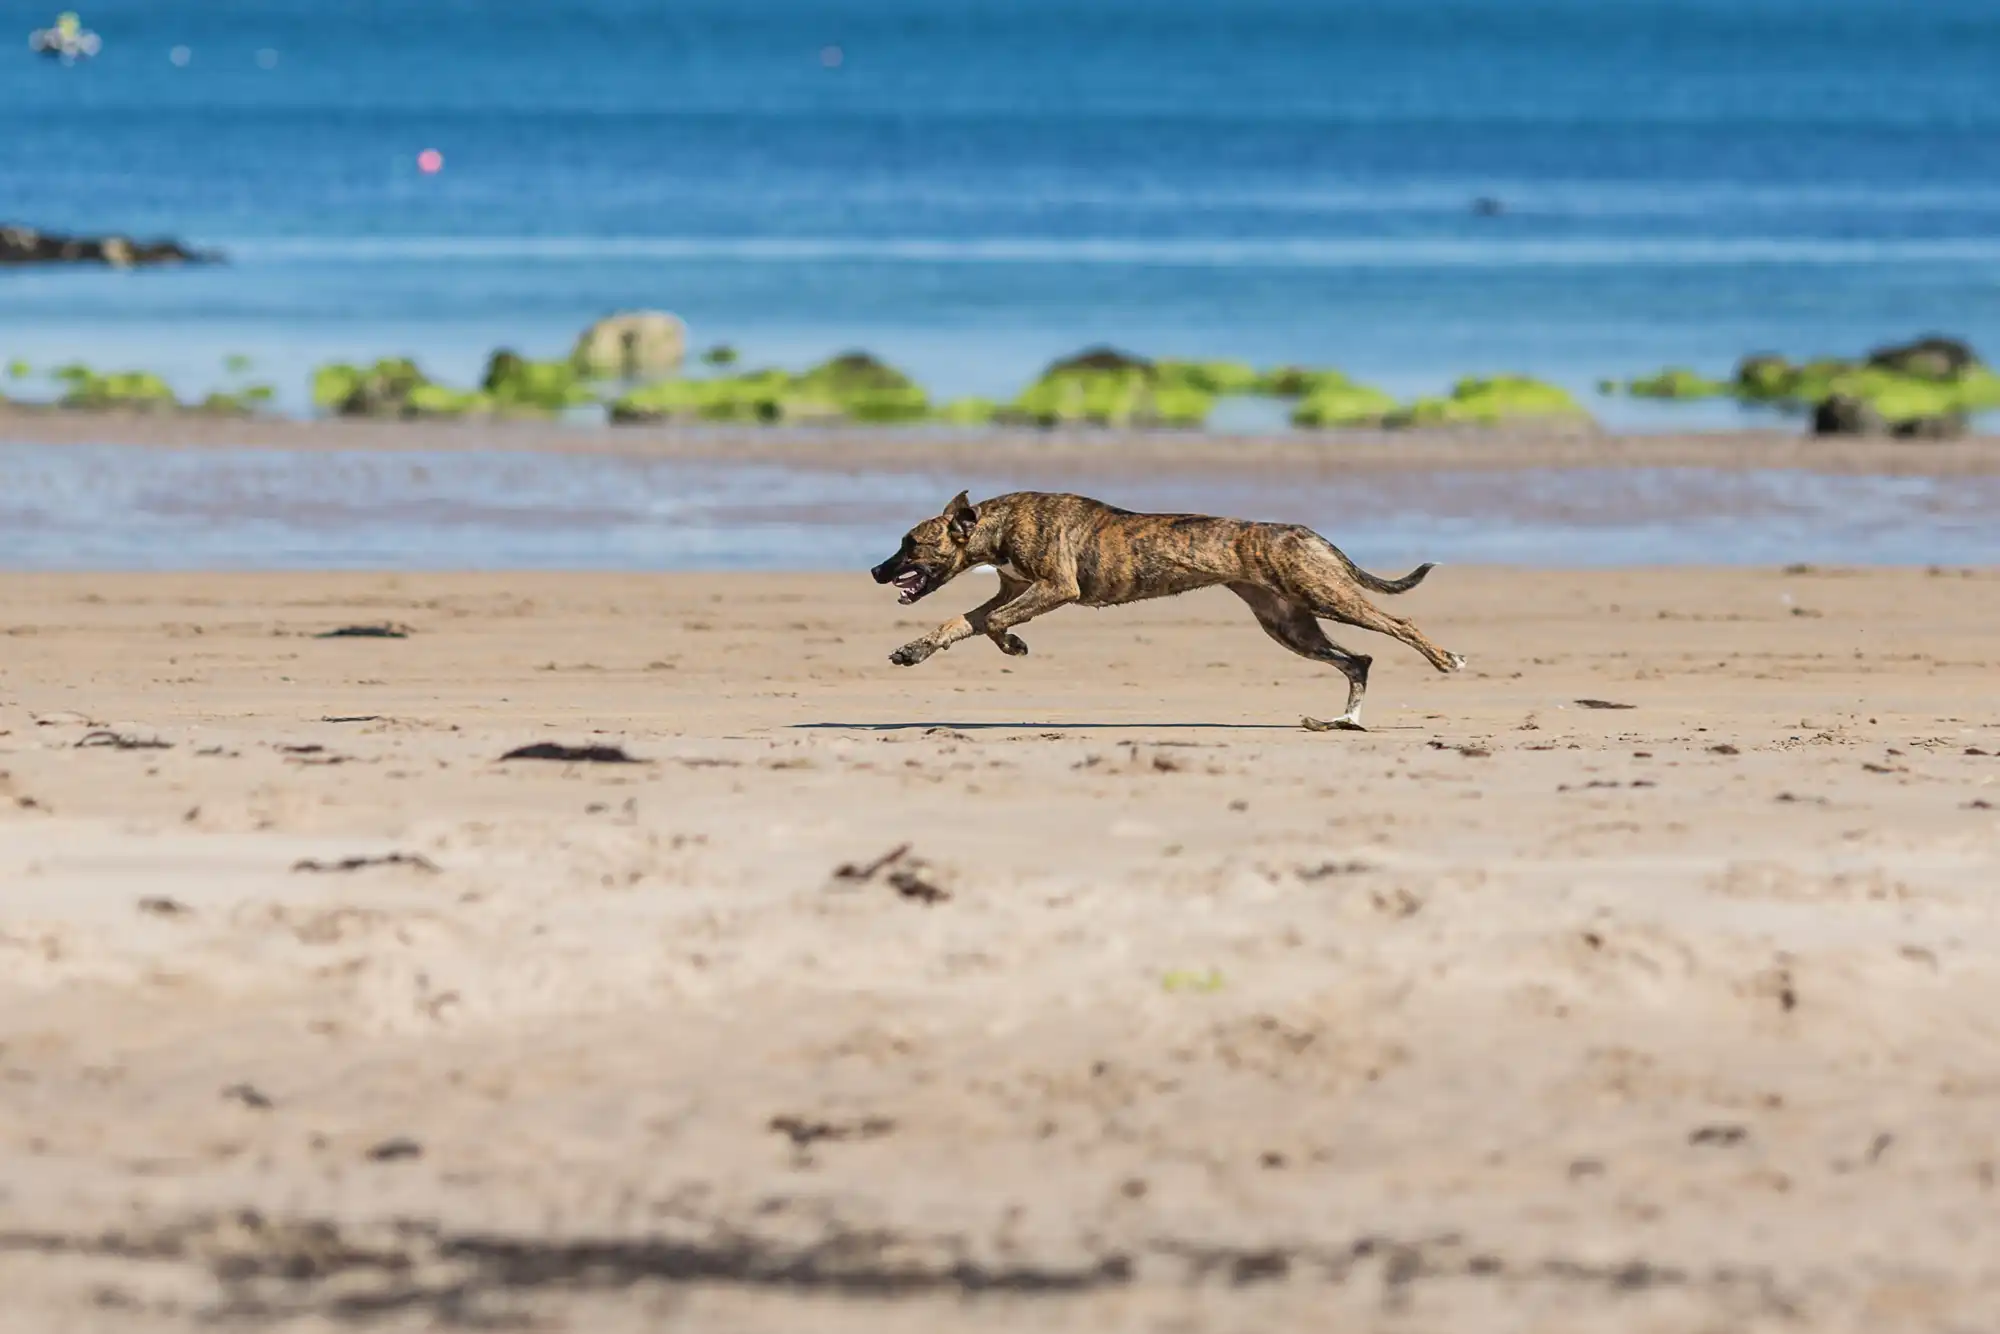 A brindle dog running on a sandy beach with the ocean in the background.